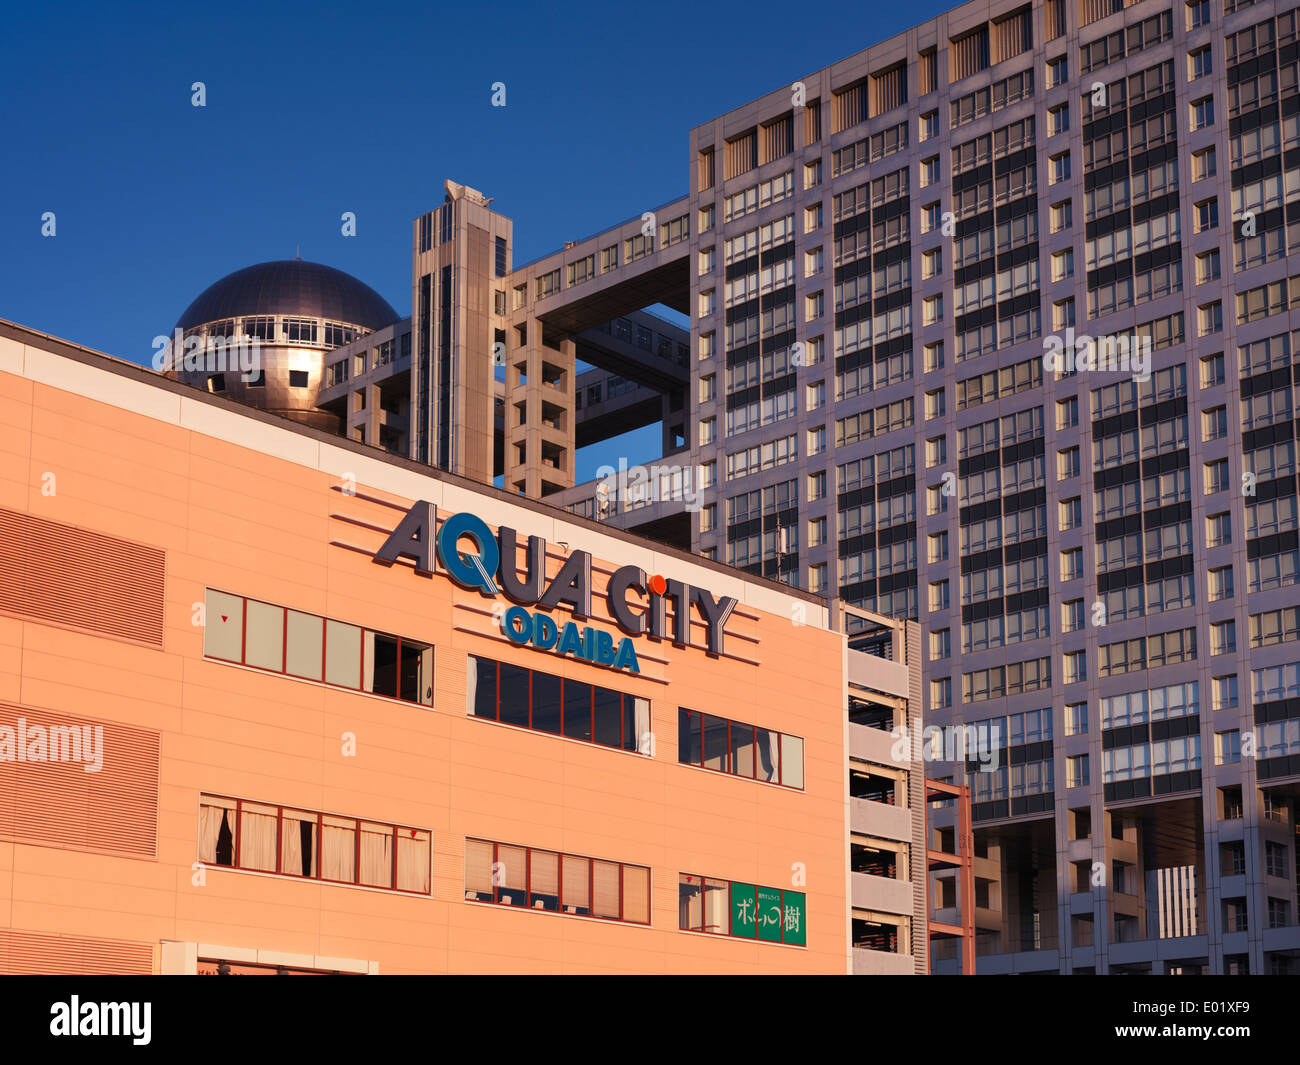 Aqua city sign and Fuji TV building in the background, tourist attractions in Odaiba, Tokyo, Japan Stock Photo